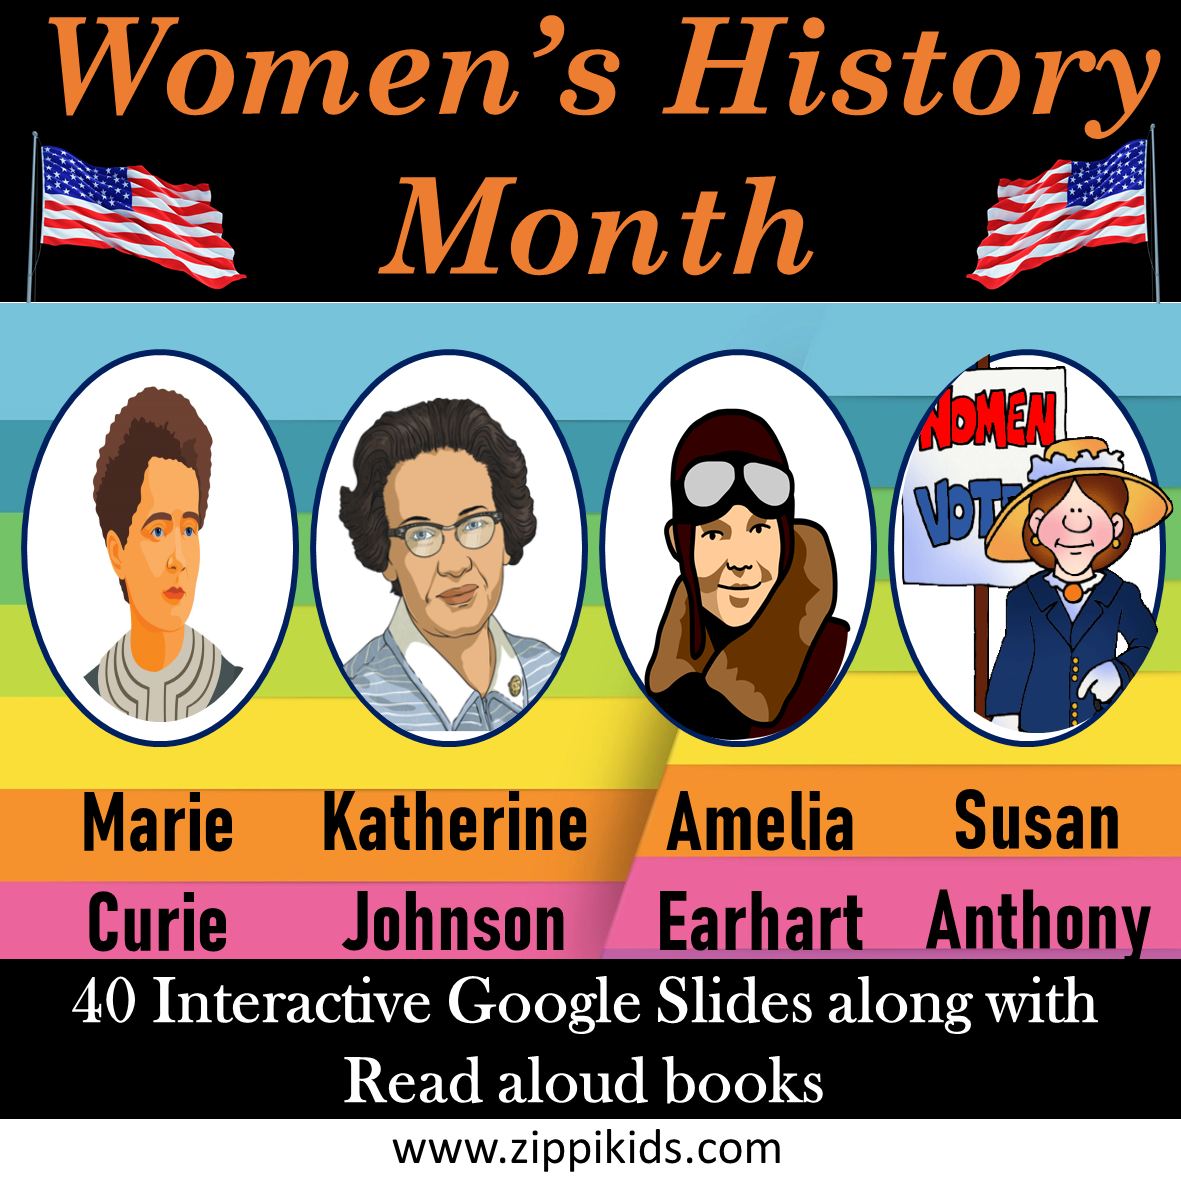 Women History Month - Marie Curie, Amelia Earhart, Katherine Johnson, Susan Anthony - 40 Google Slides